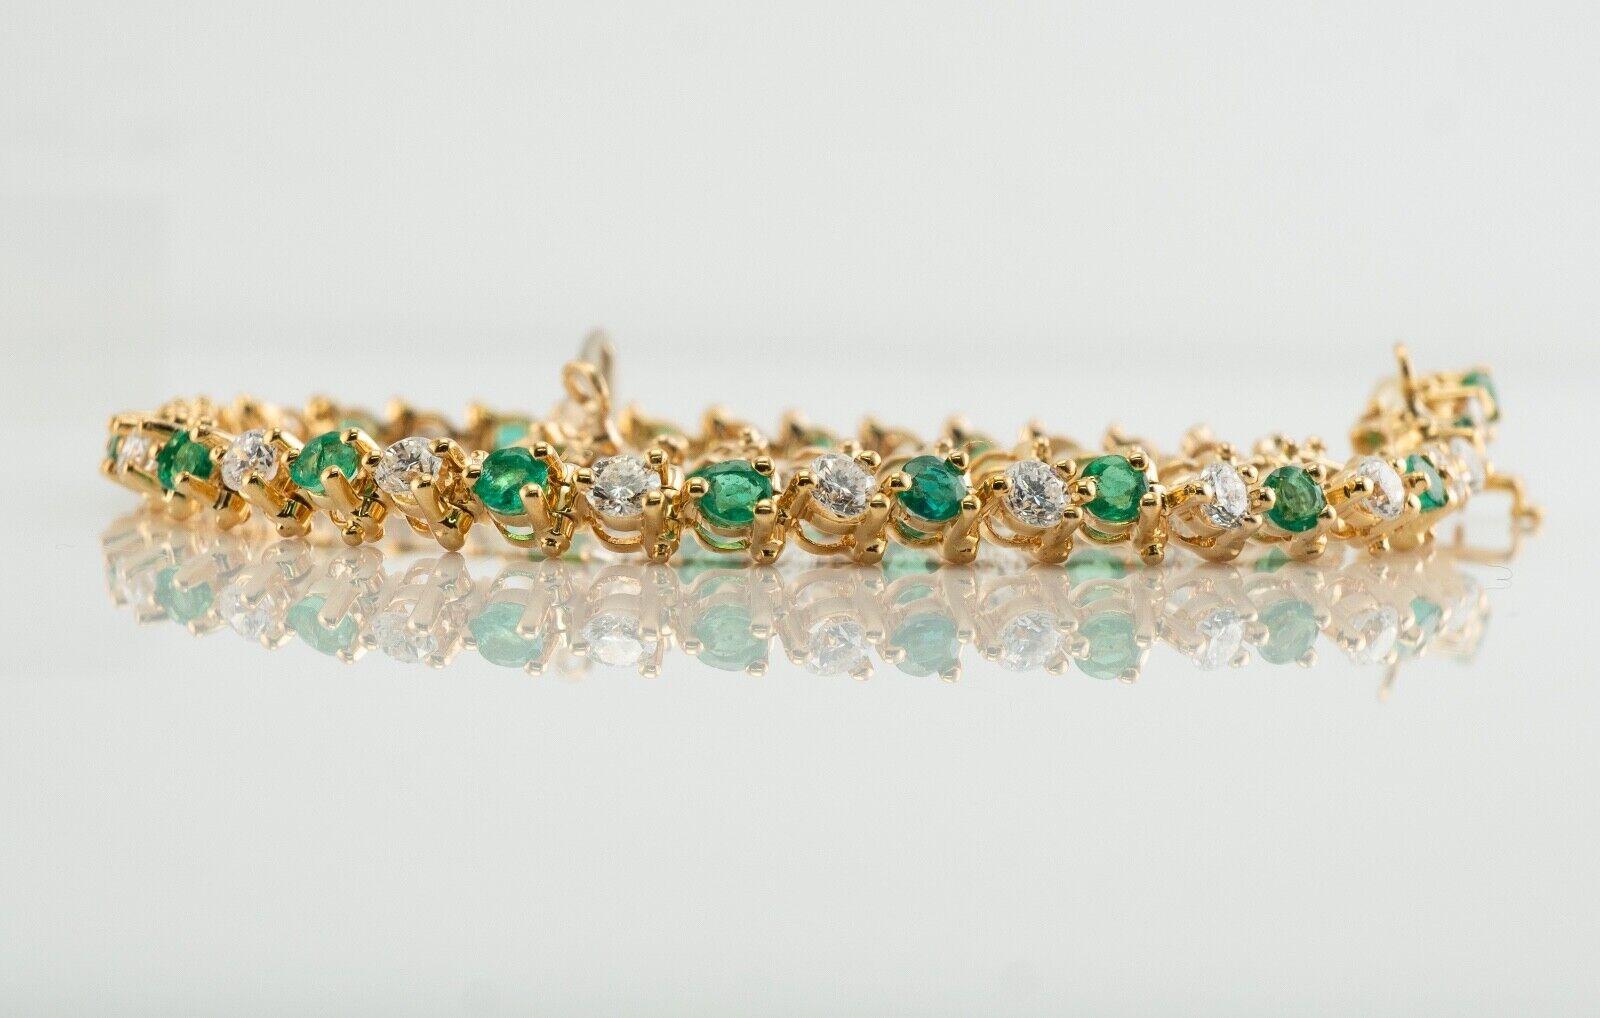 This beautiful estate bracelet is finely crafted in solid 14K Yellow gold and set with Natural Earth mined Emeralds and Genuine Diamonds. Twenty six 2mm each emeralds total 1.04 carat. These gems are very clean and transparent, with great intensity